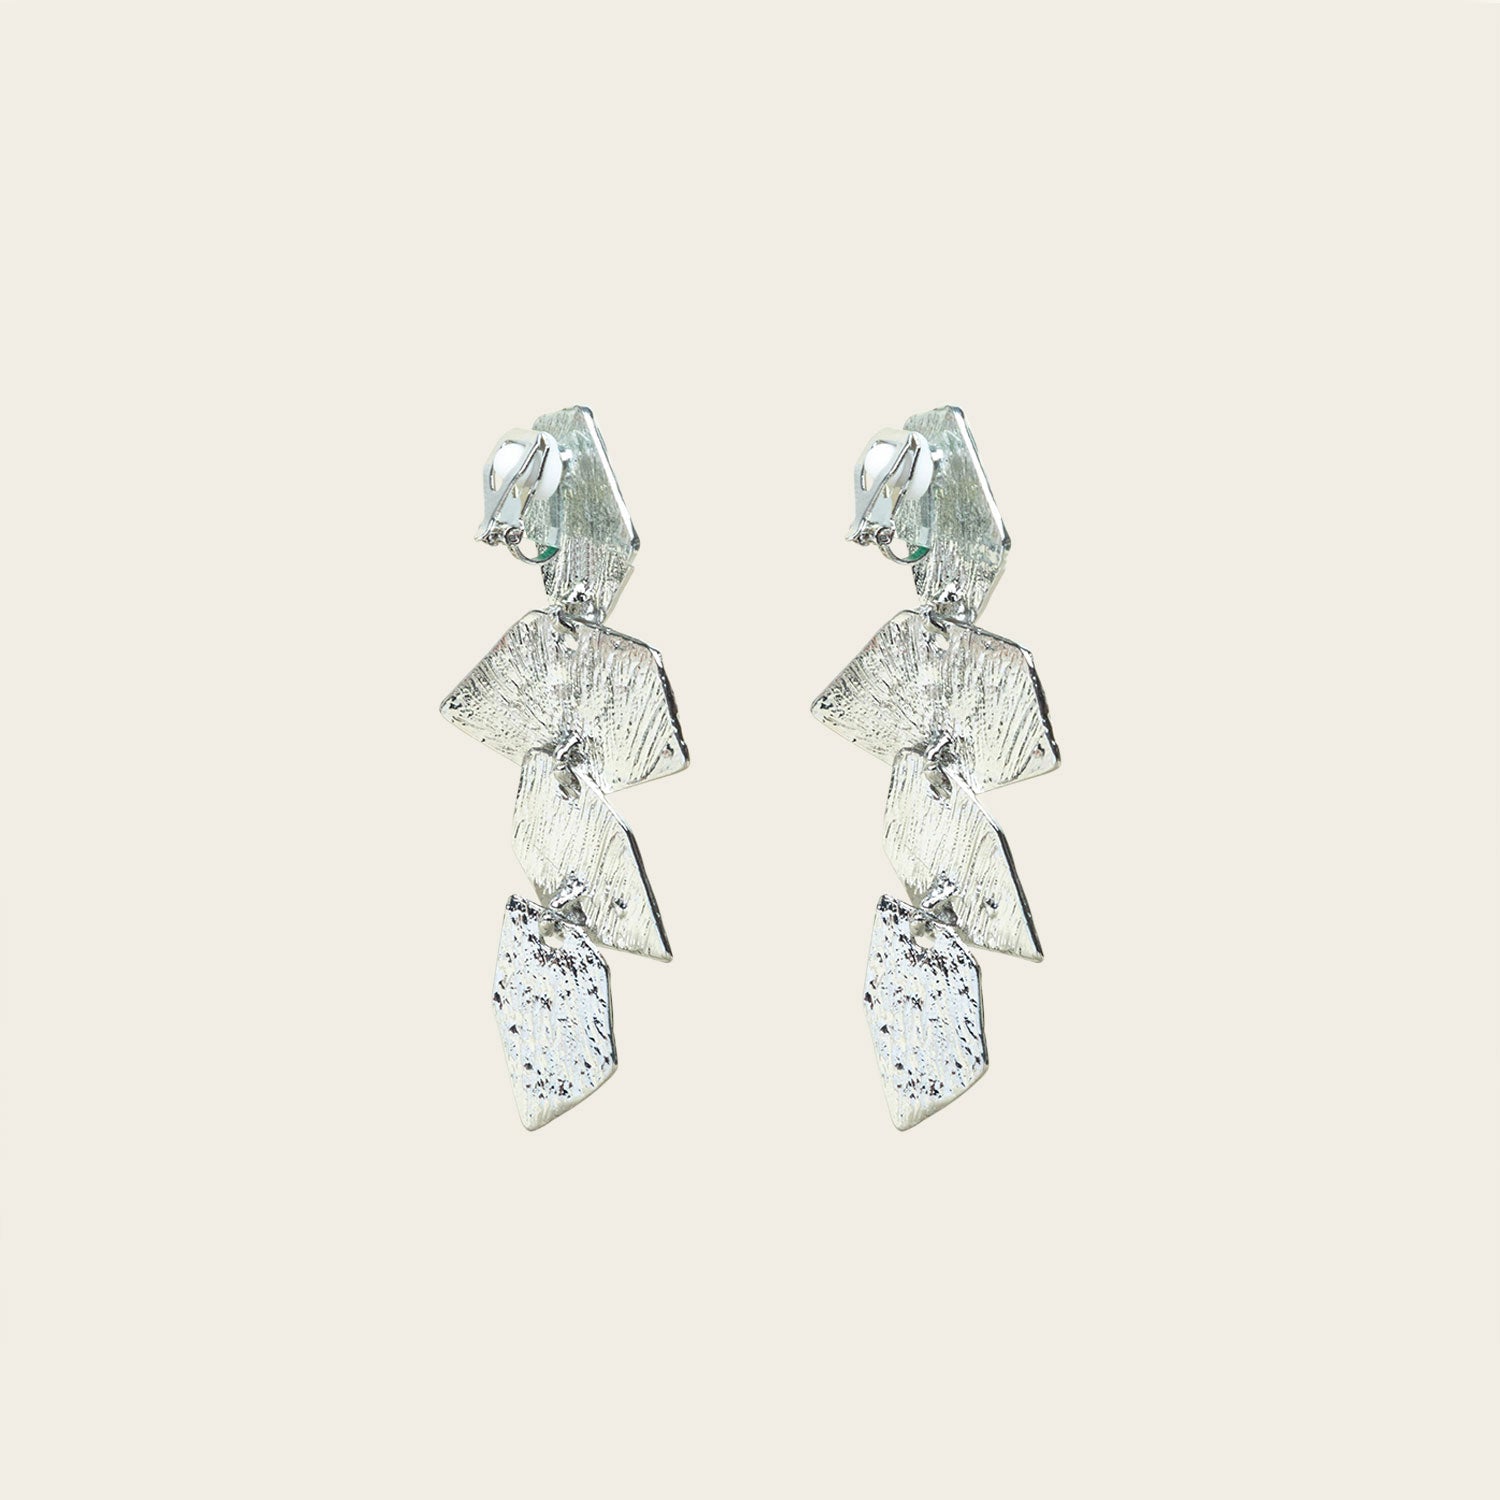 Image of the Manhattan Drop Clip On Earrings in Silver provide a secure and comfortable fit for any ear type. The padded clip-on design features a zinc and copper alloy construction, and lasts approximately 8-12 hours. As the earring pairs are non-adjustable, each purchase contains a single pair.